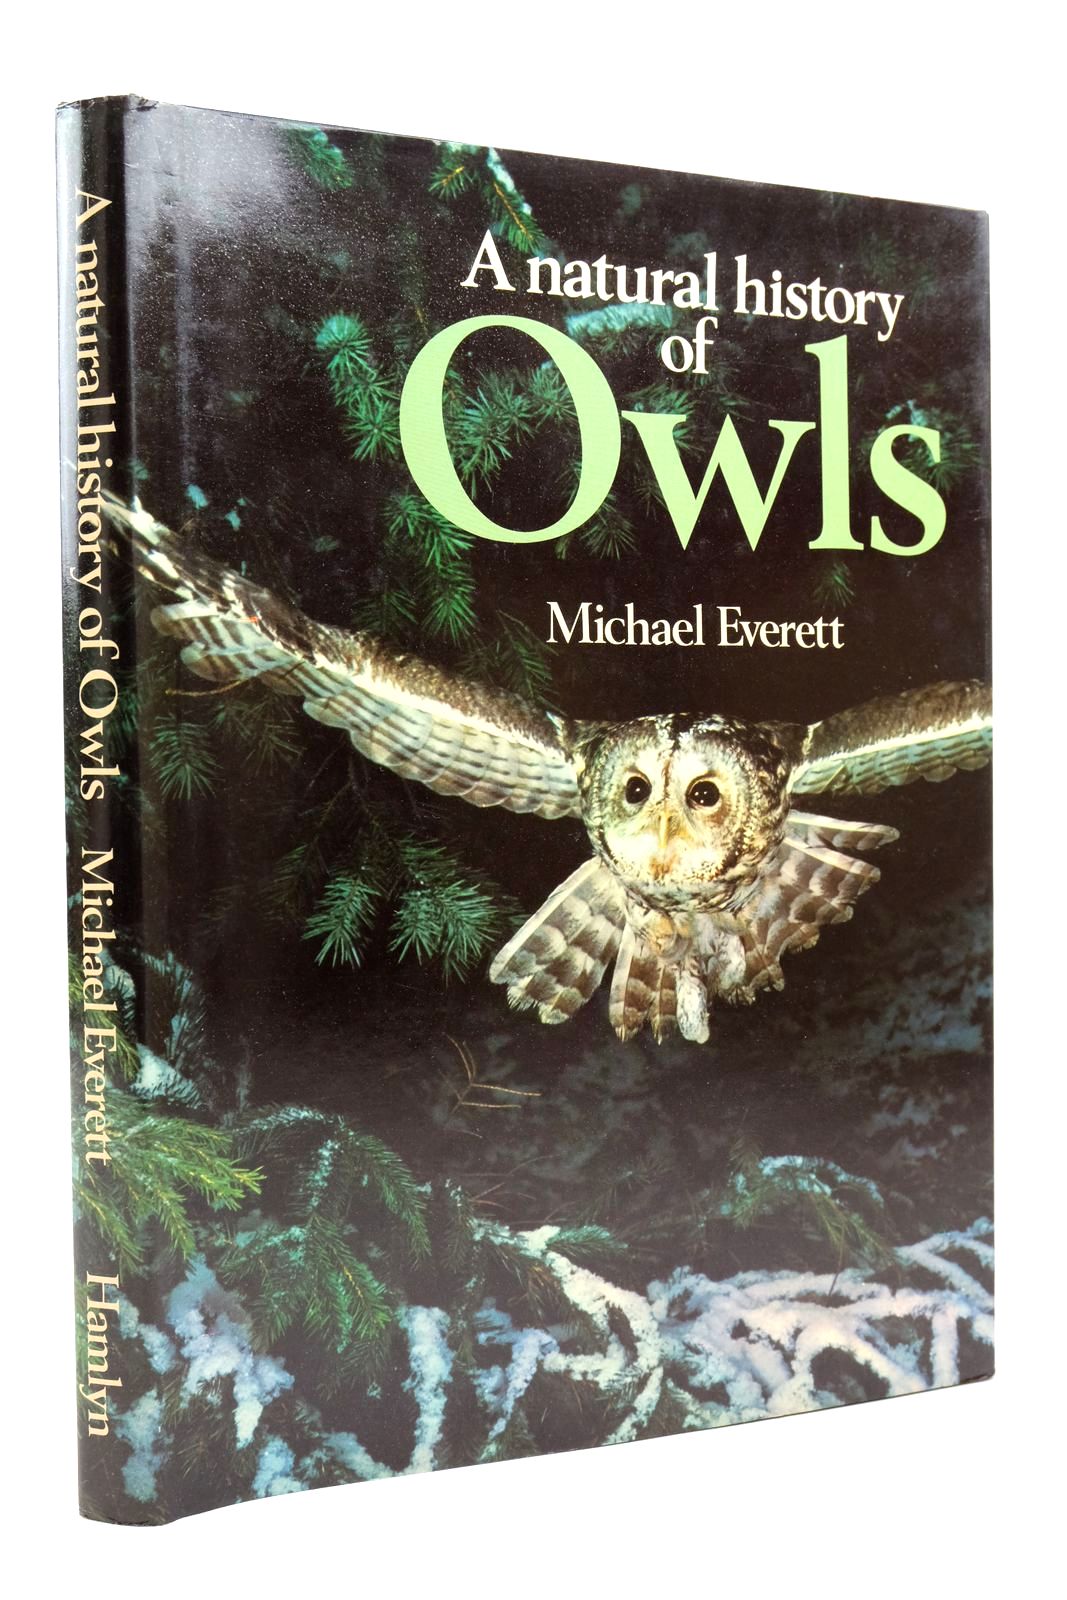 Photo of A NATURAL HISTORY OF OWLS written by Everett, Michael published by Hamlyn (STOCK CODE: 2139083)  for sale by Stella & Rose's Books